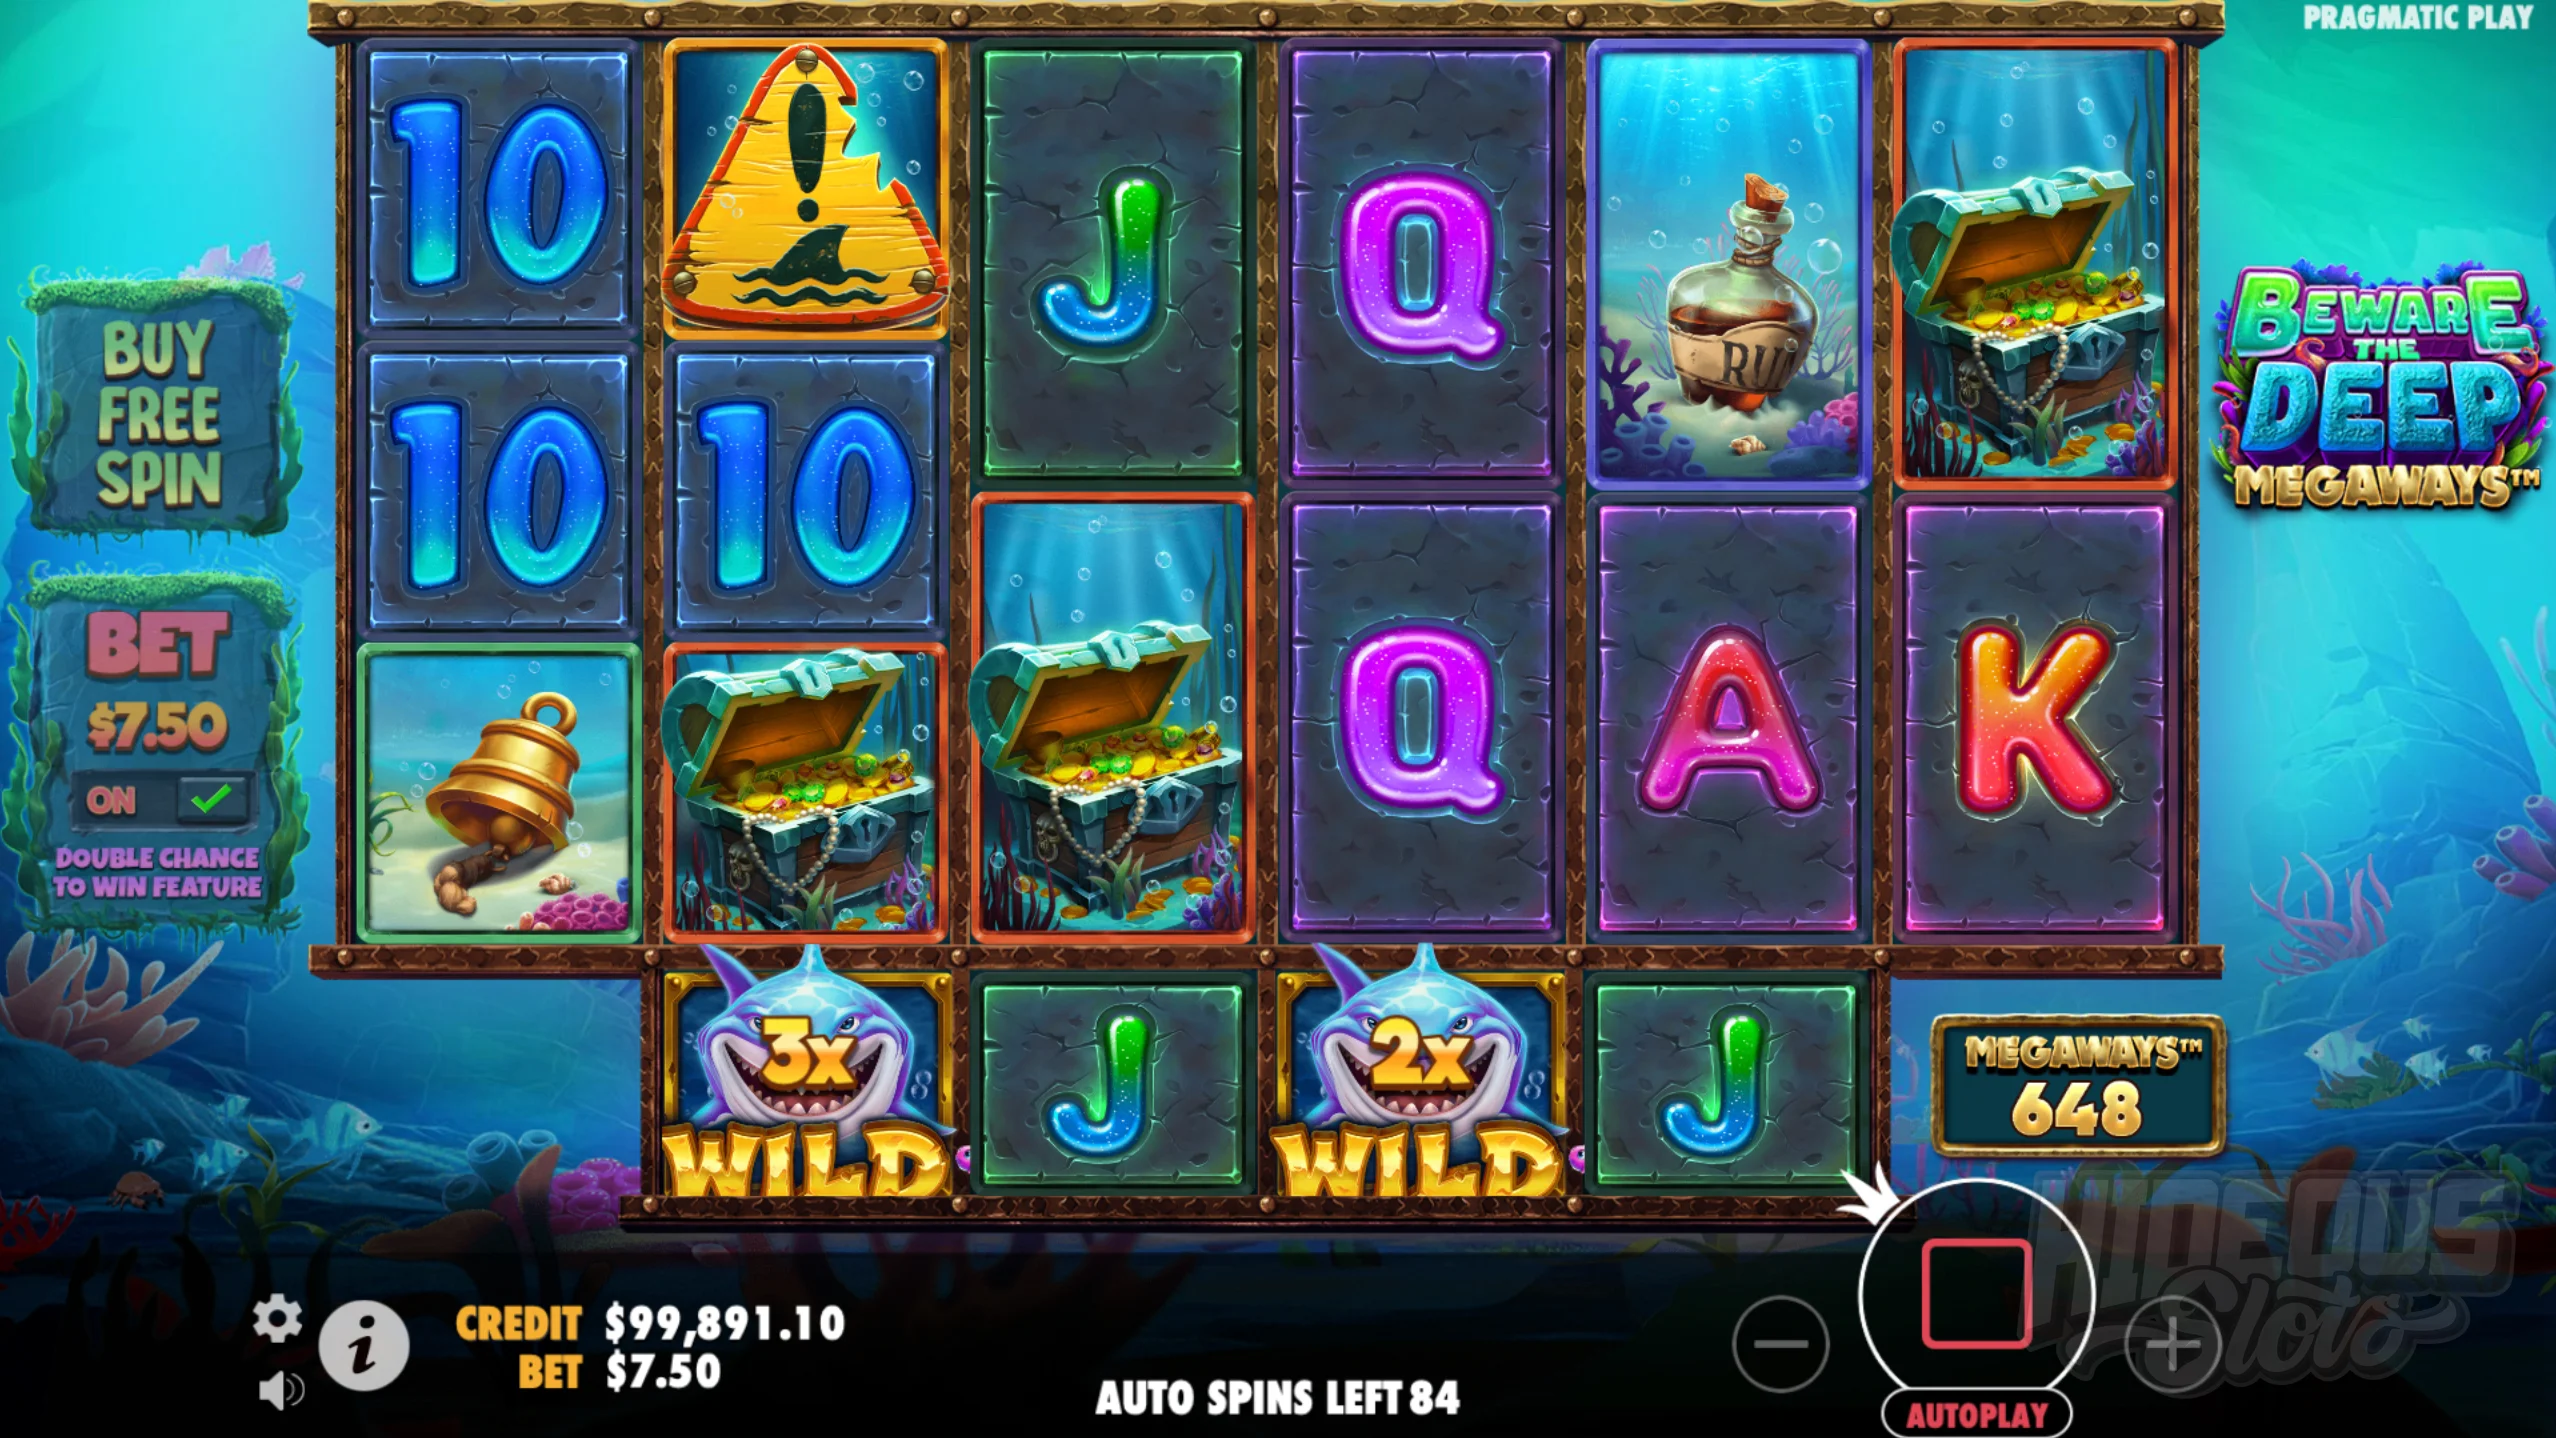 Wild Symbols Can Land With Multipliers up to 25x in the Base Game or 100x in Free Spins